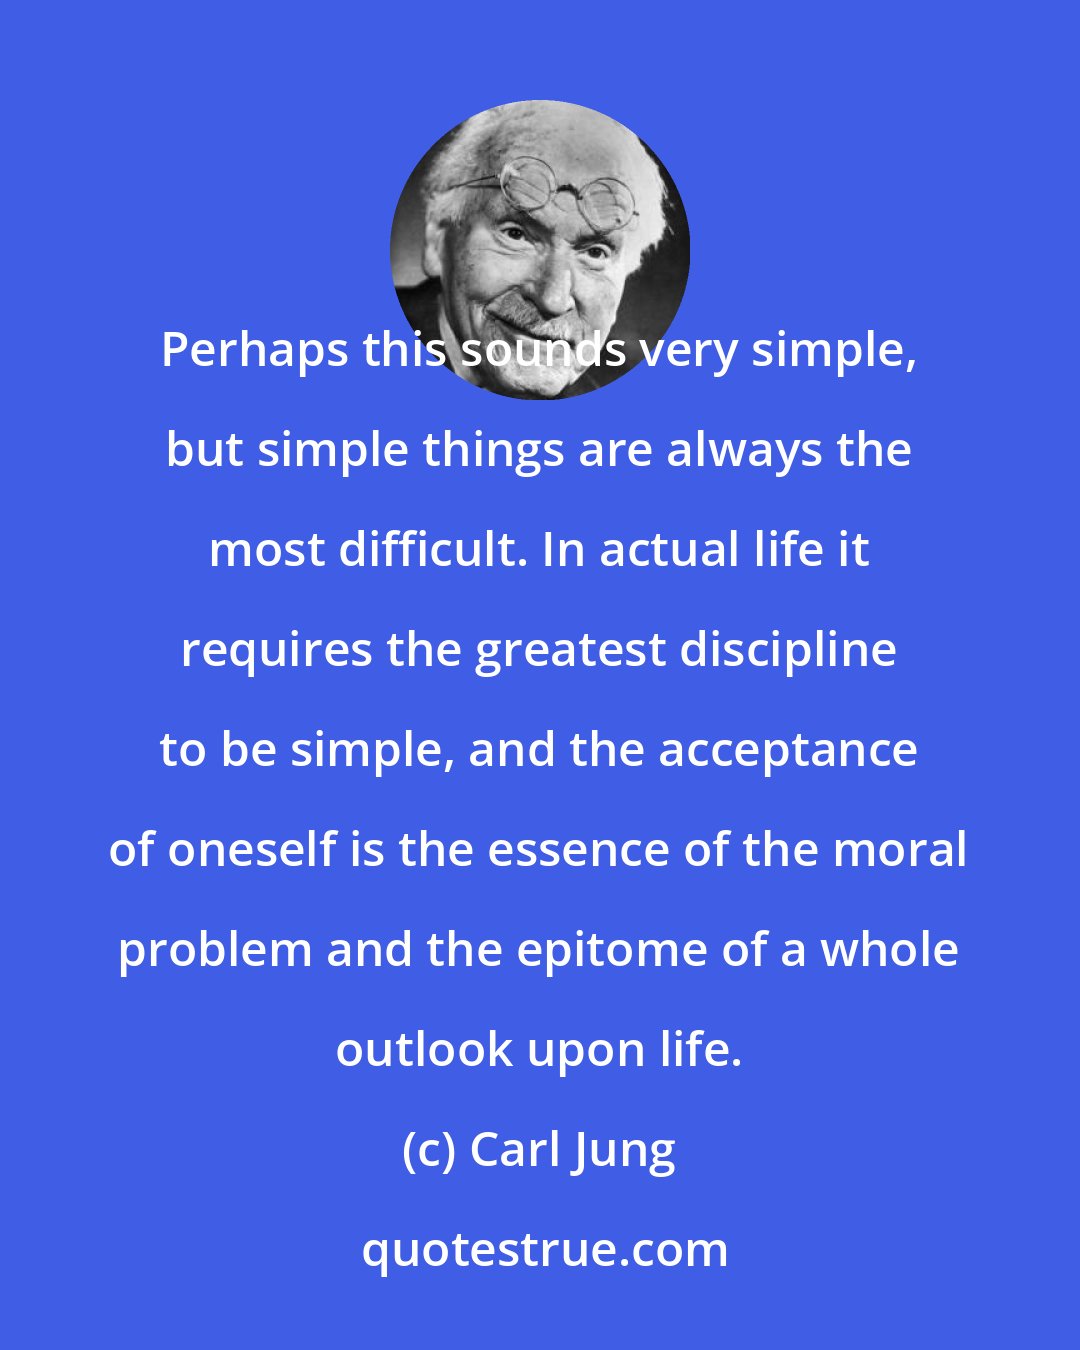 Carl Jung: Perhaps this sounds very simple, but simple things are always the most difficult. In actual life it requires the greatest discipline to be simple, and the acceptance of oneself is the essence of the moral problem and the epitome of a whole outlook upon life.